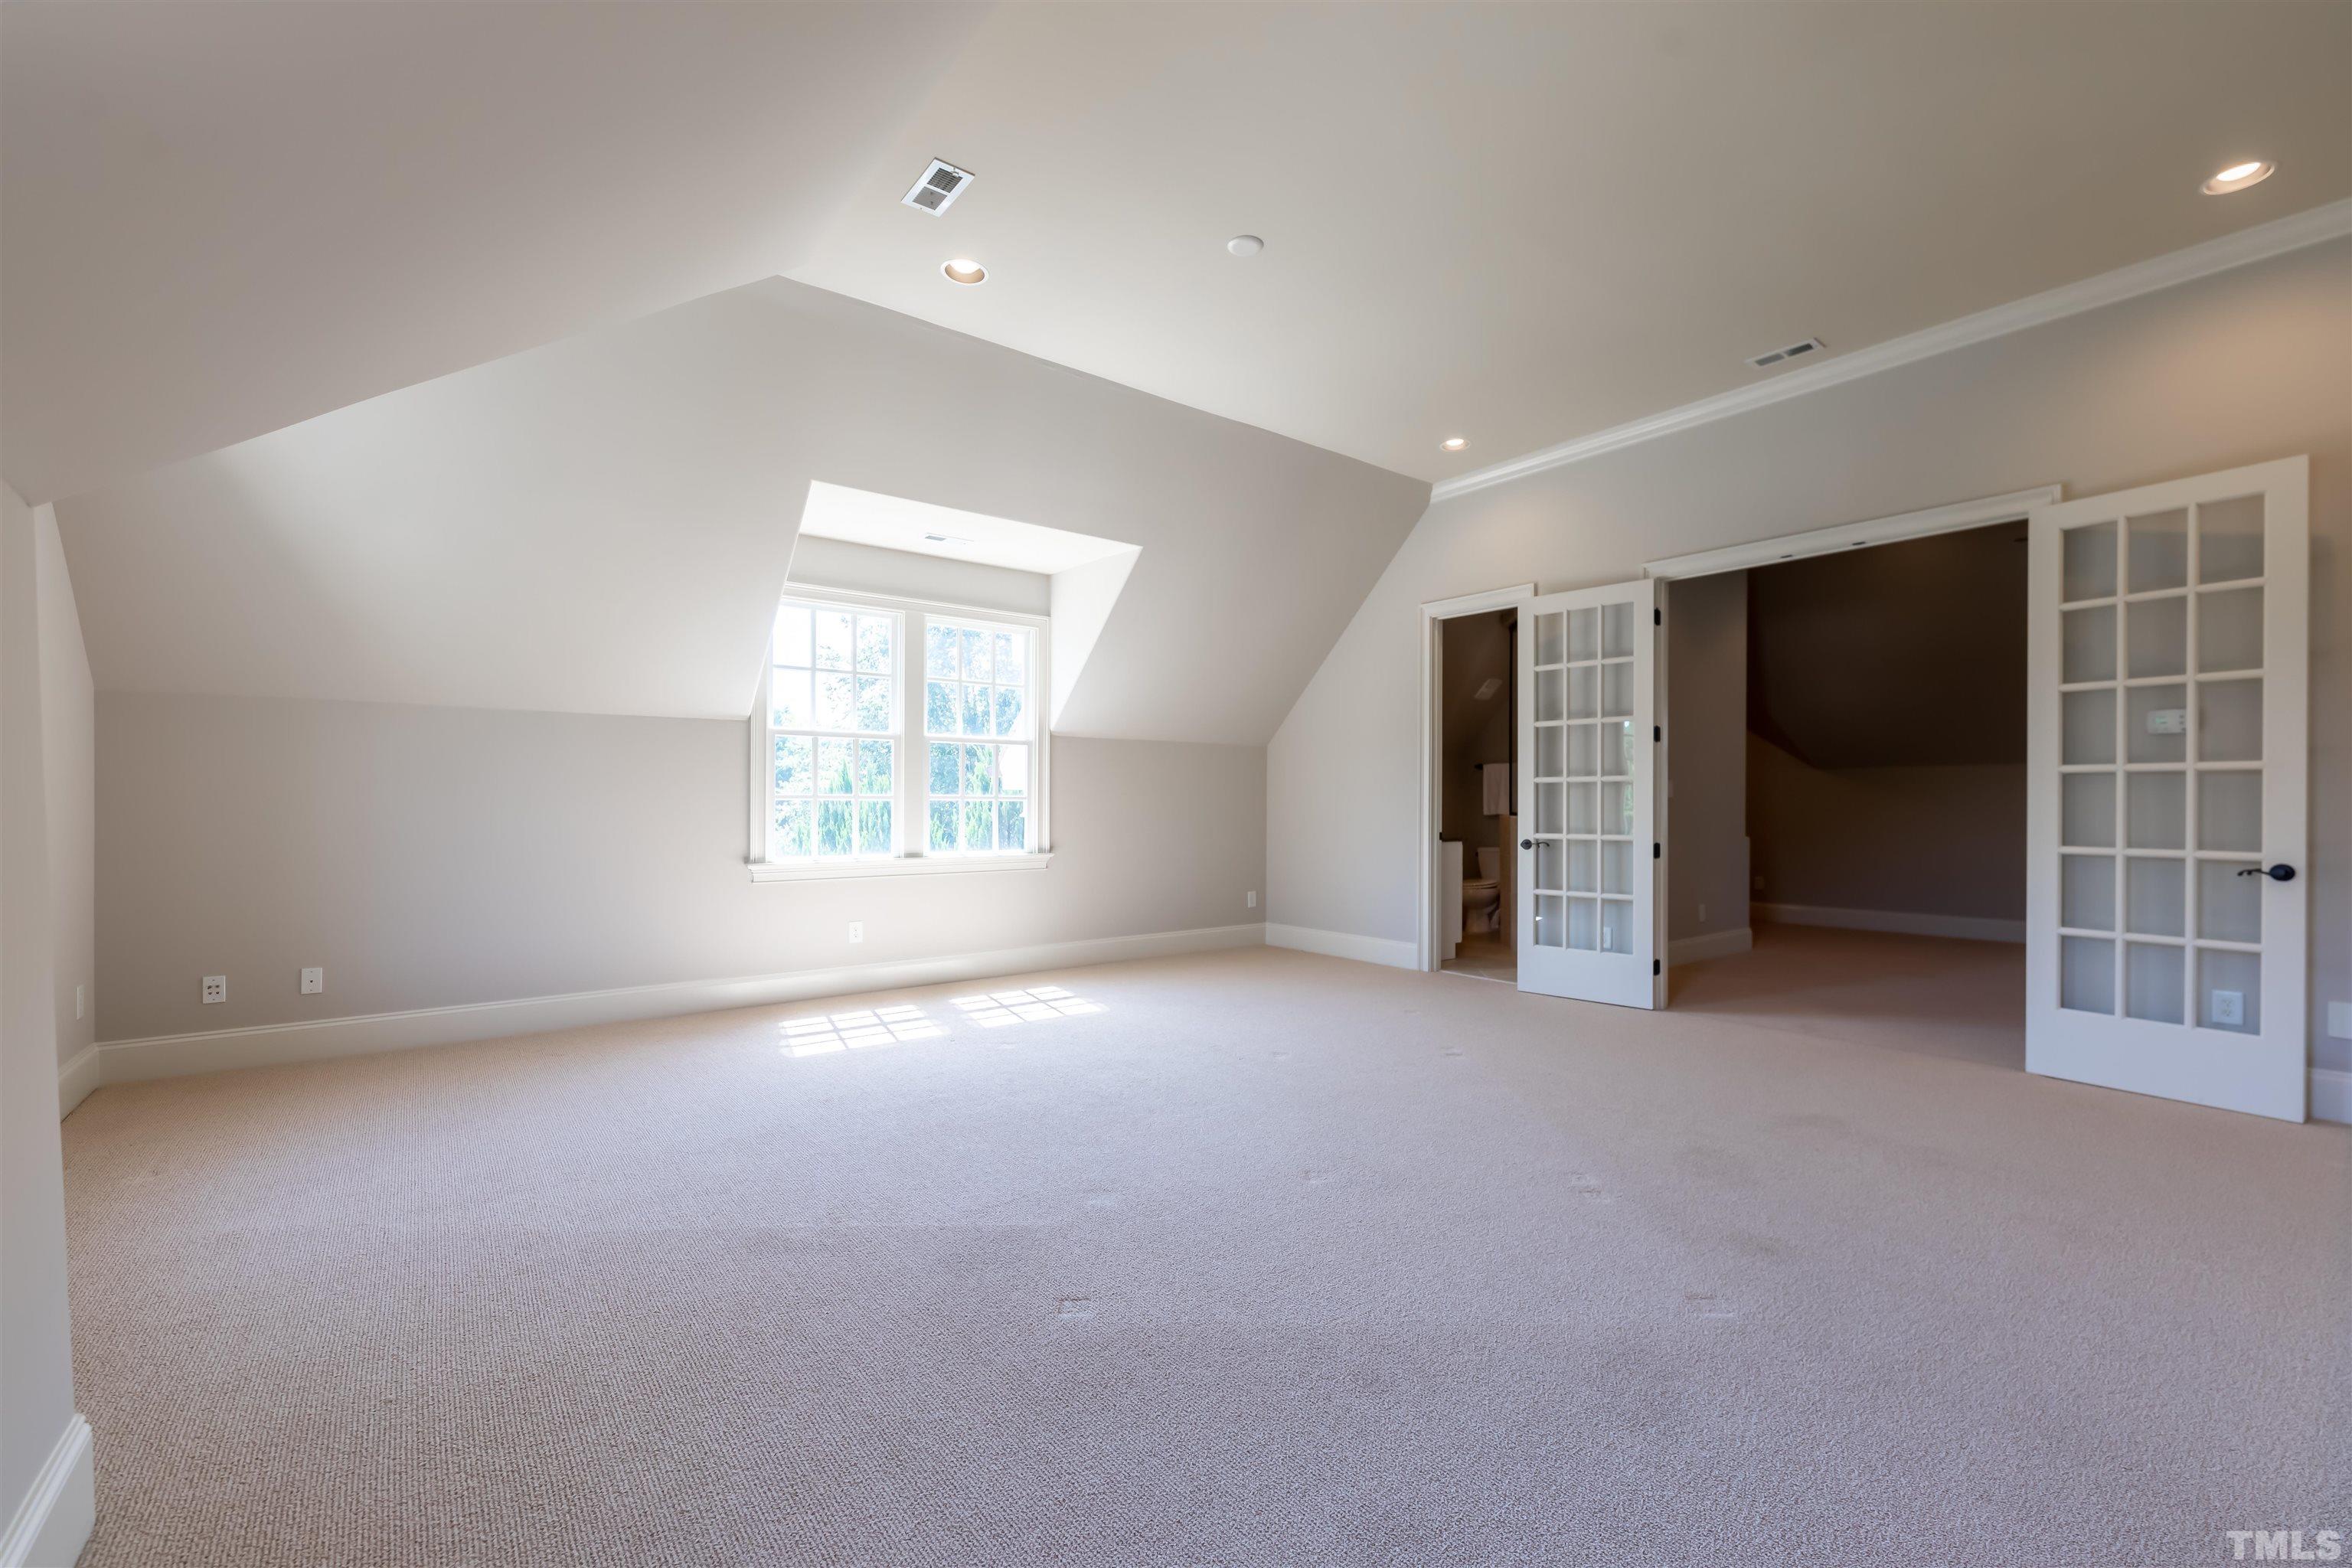 The second floor bonus has hall access as well as back stair access.  There is a flex room off the bonus that can be a second office/exercise room/toy room.  Not pictured is the finished third floor with so much space & a full bath plus access to storage.